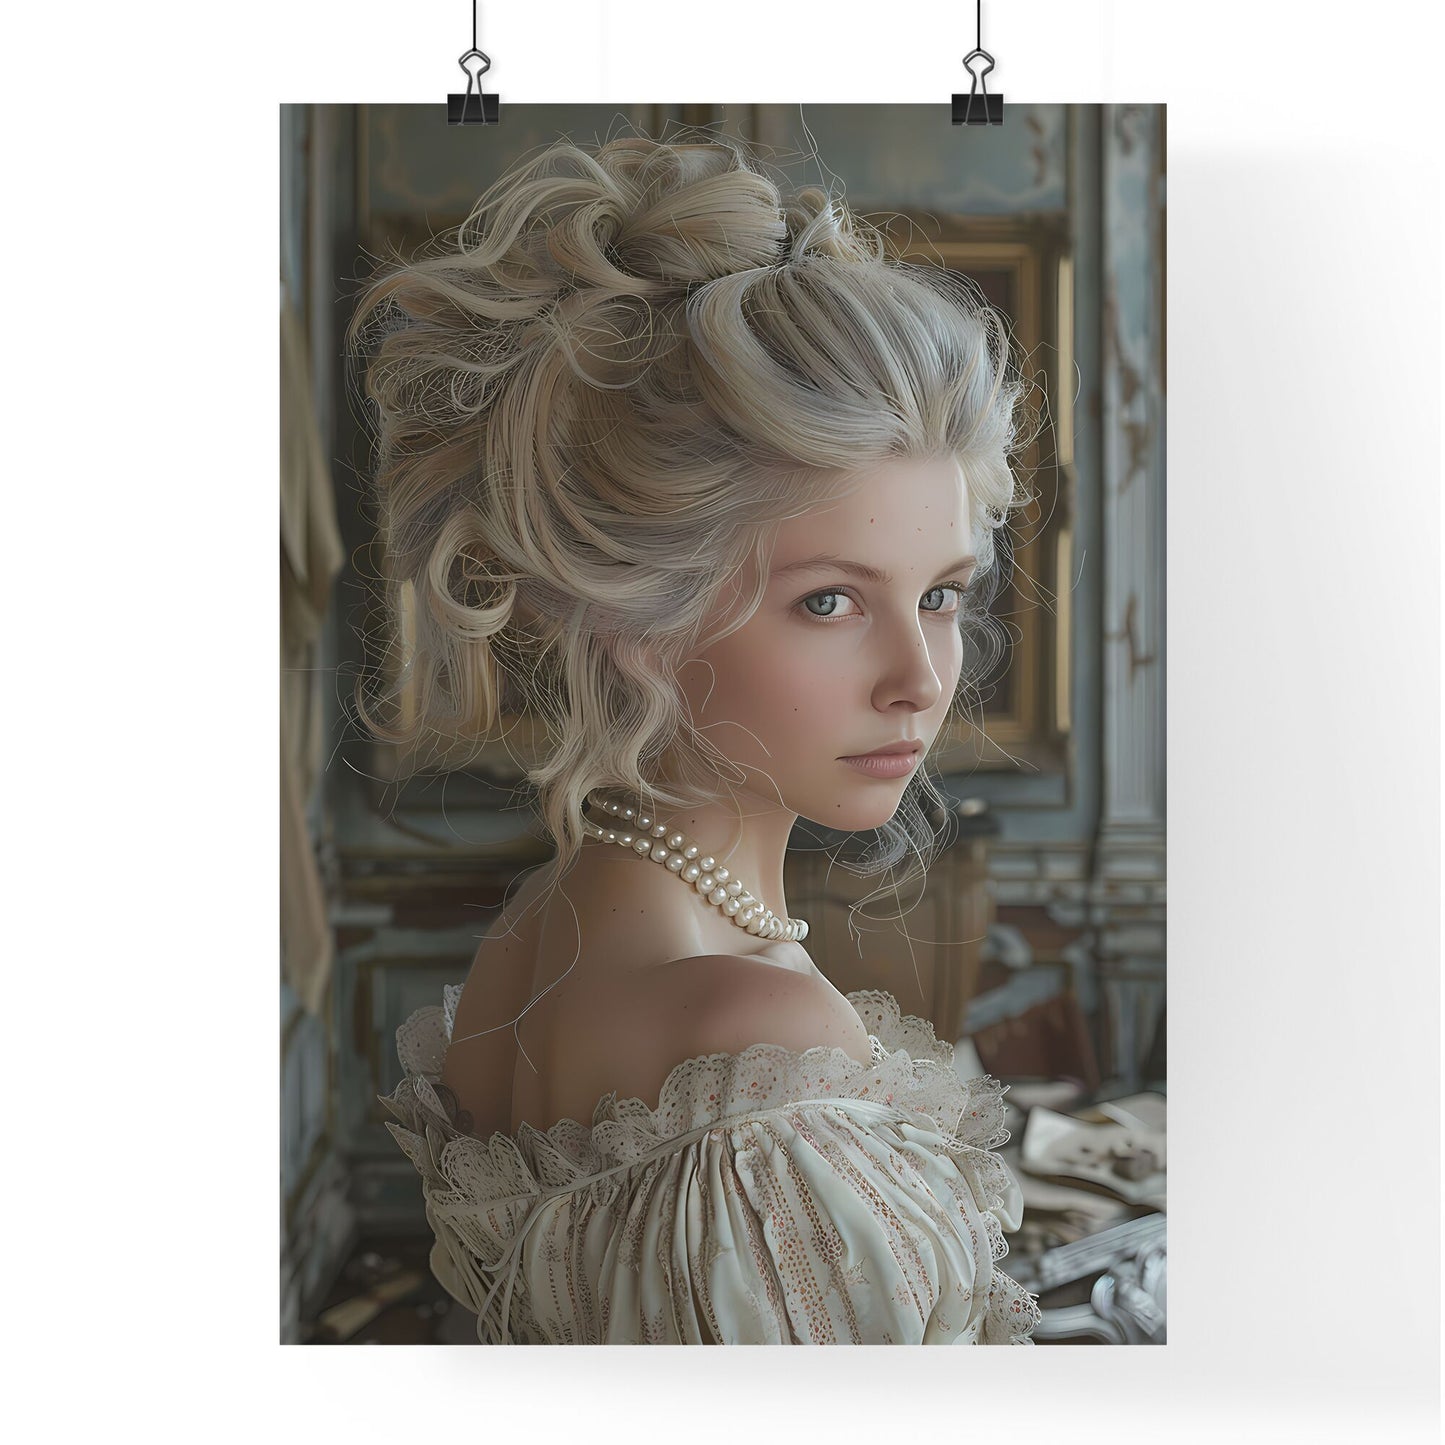 Melancholic Marie Antoinette in Versailles' Hall of Mirrors, Artfully Depicted in Watercolor Default Title